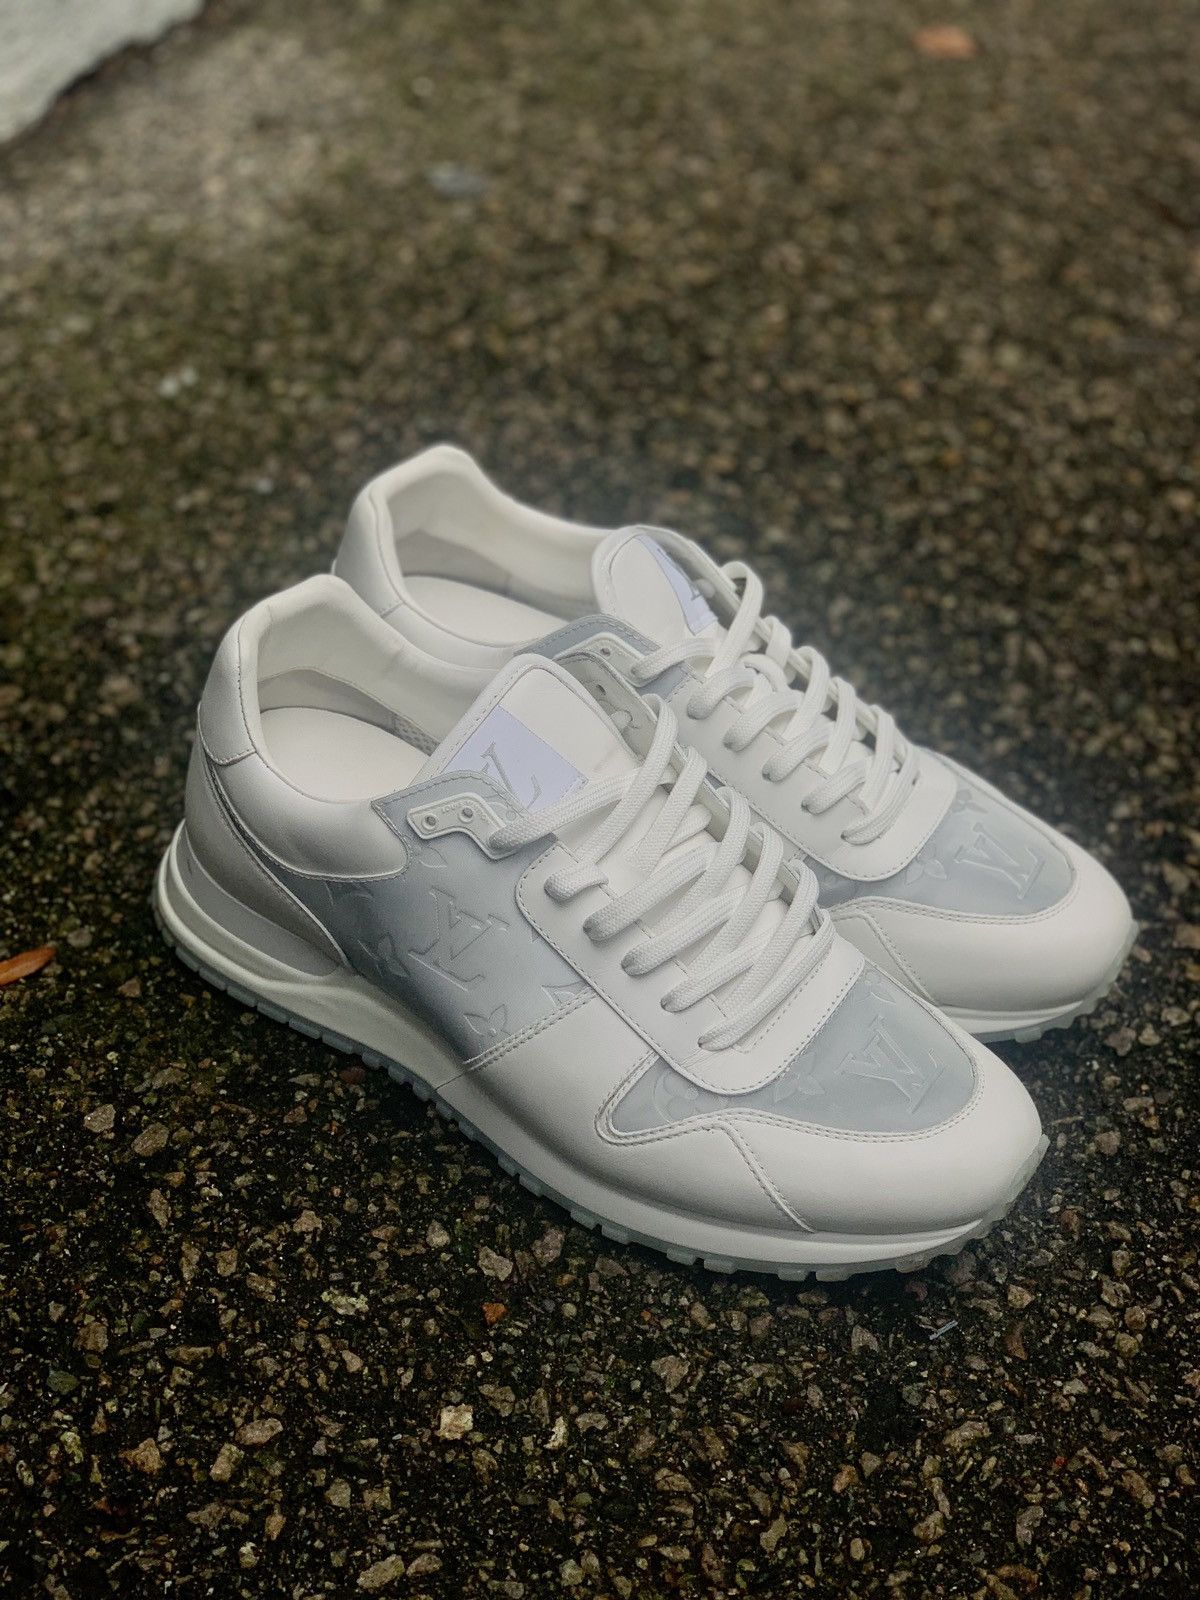 Pre-owned Louis Vuitton $1290 White And Silver Run Away Sneakers